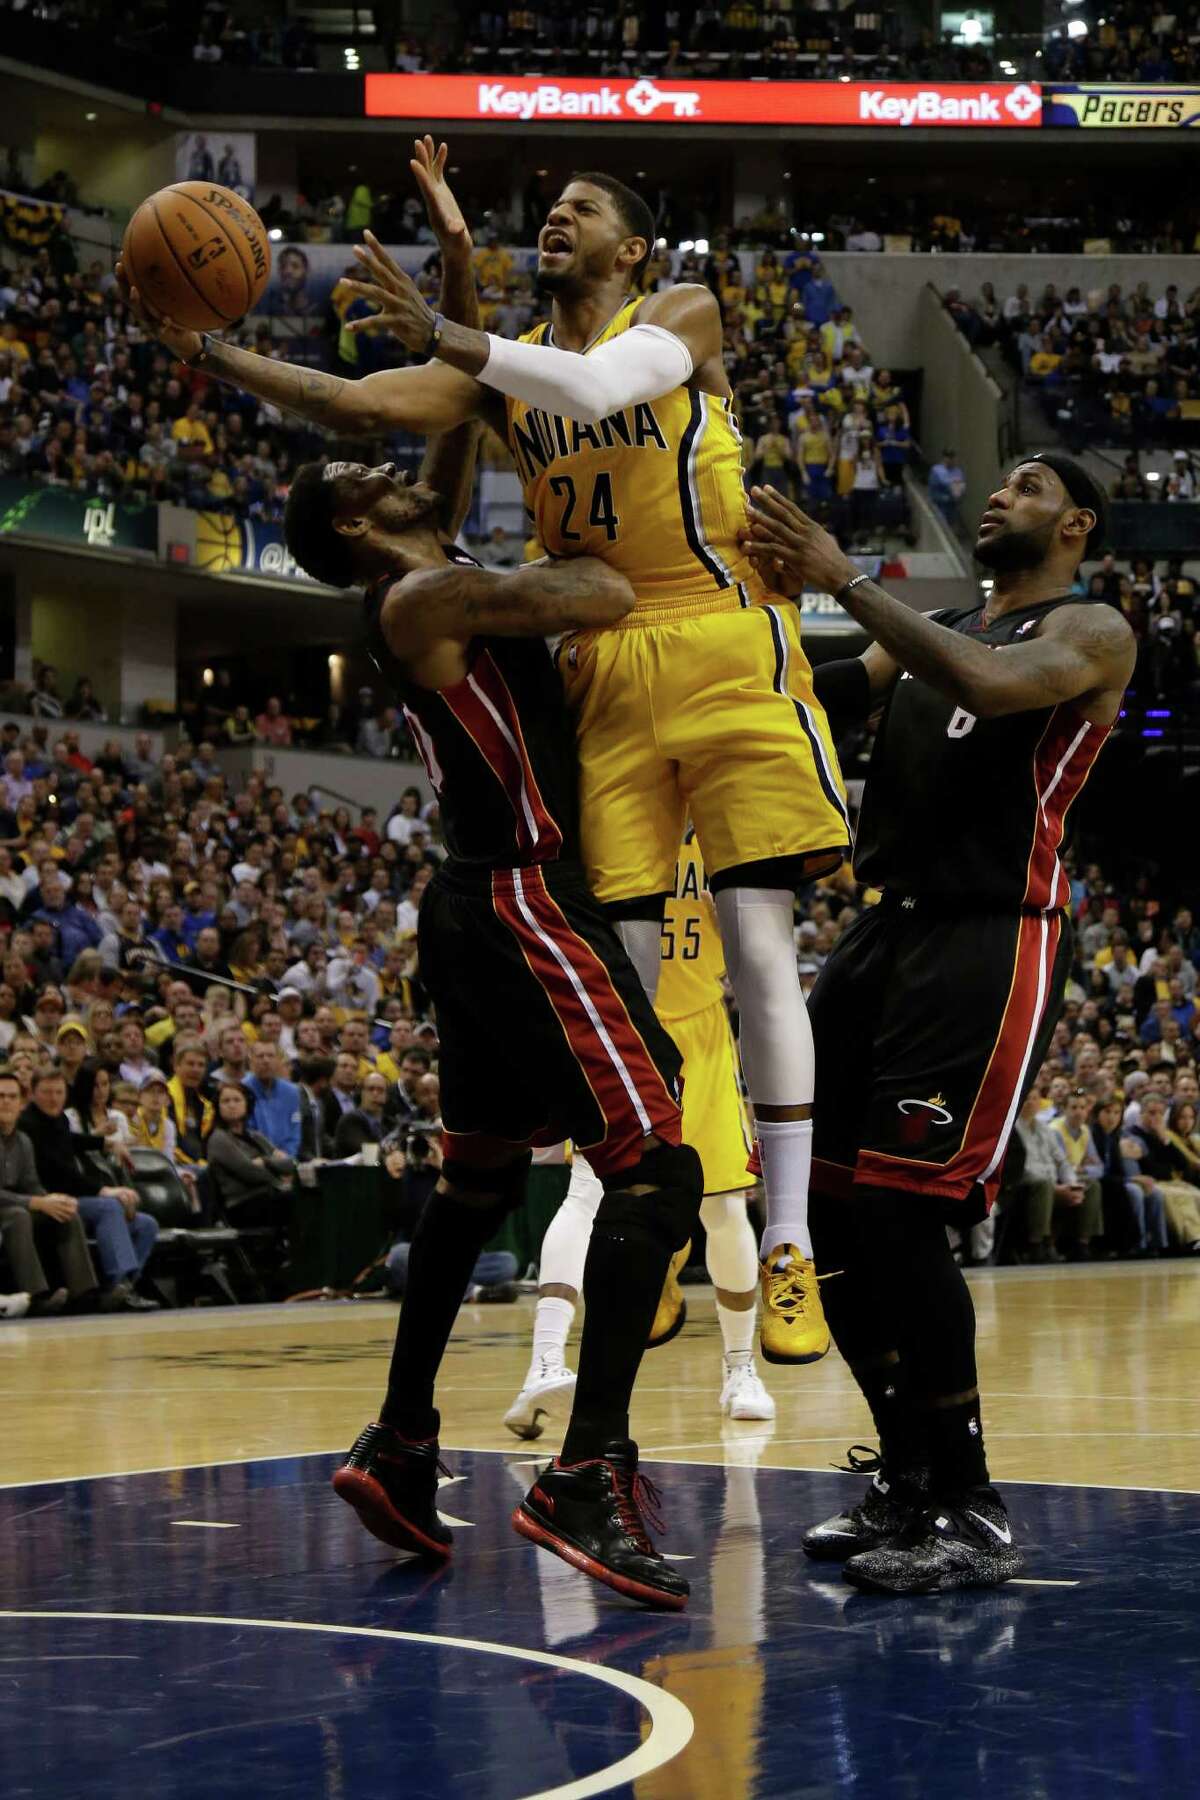 Paul George (24) and the host Pacers got the best of the Heat with an 84-83 victory on Wednesday.